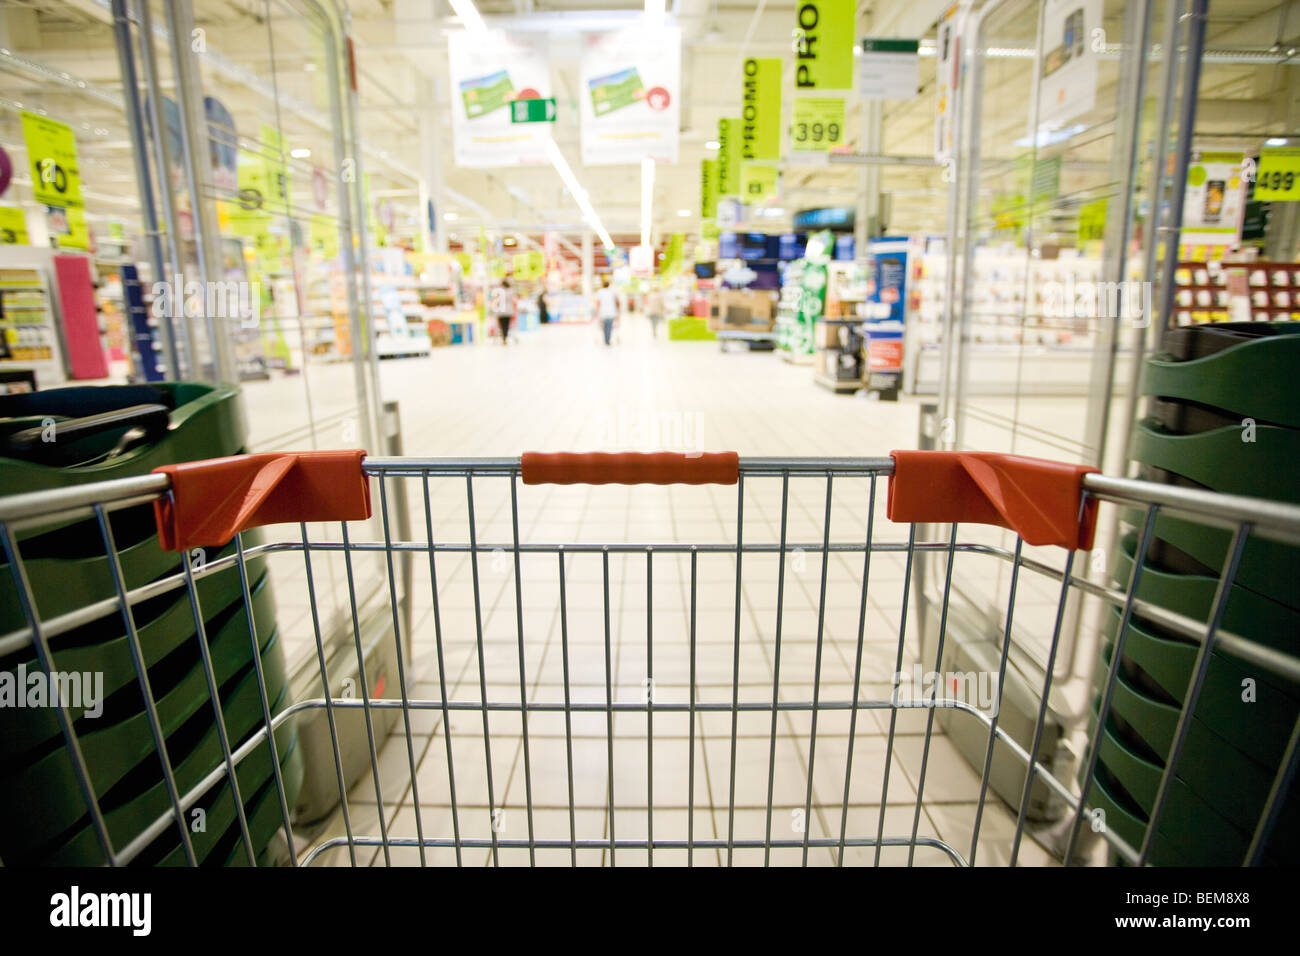 Entering supermarket with shopping cart Stock Photo